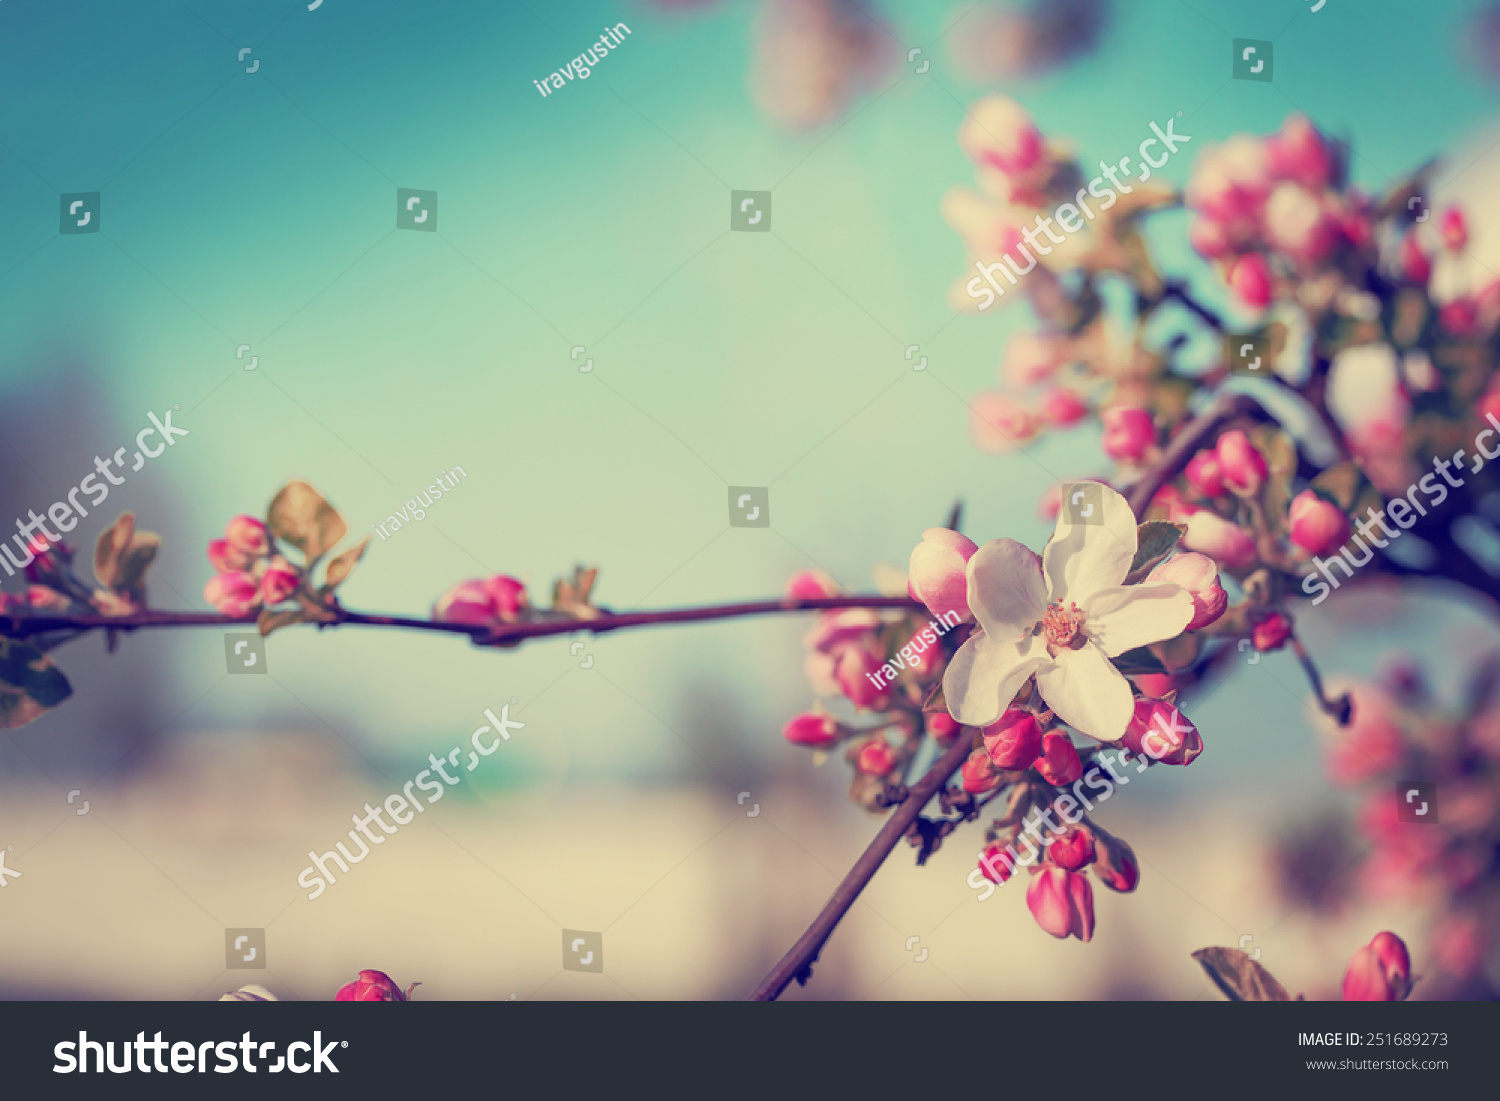 Blossom tree over nature background/ Spring flowers/Spring Background #251689273